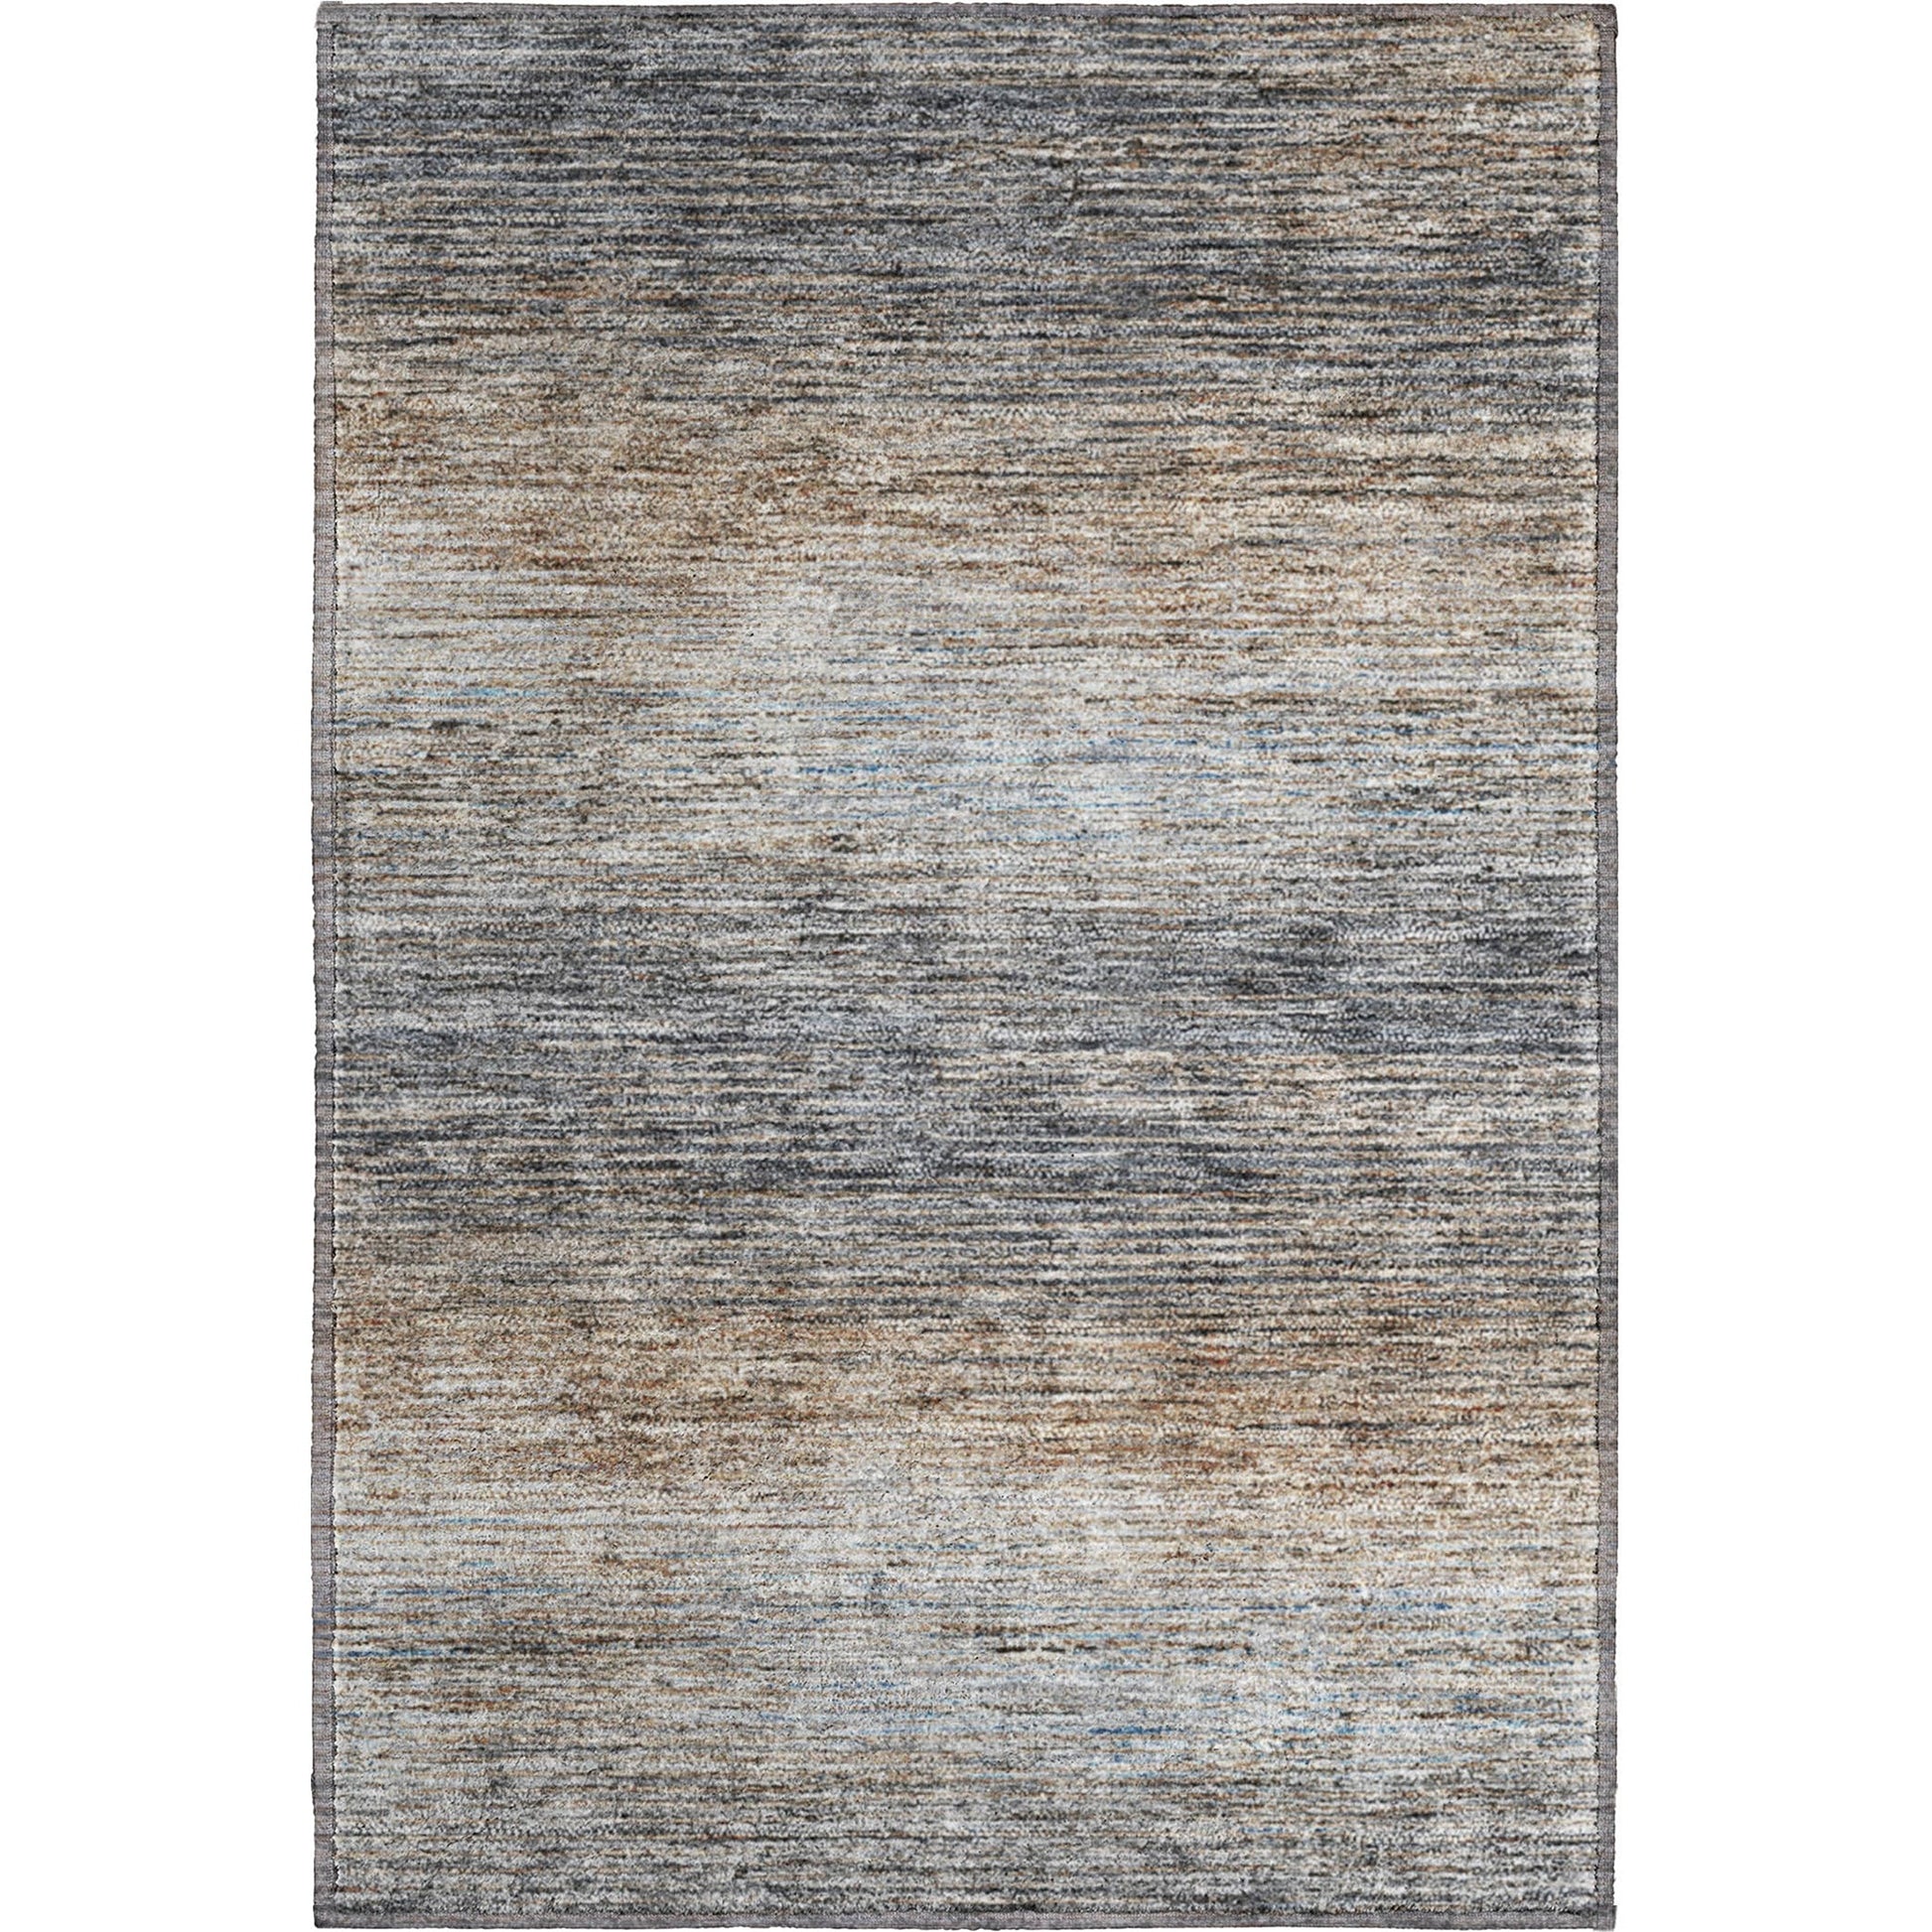 Dalyn Rugs Trevi TV1 Pewter Transitional  Rug